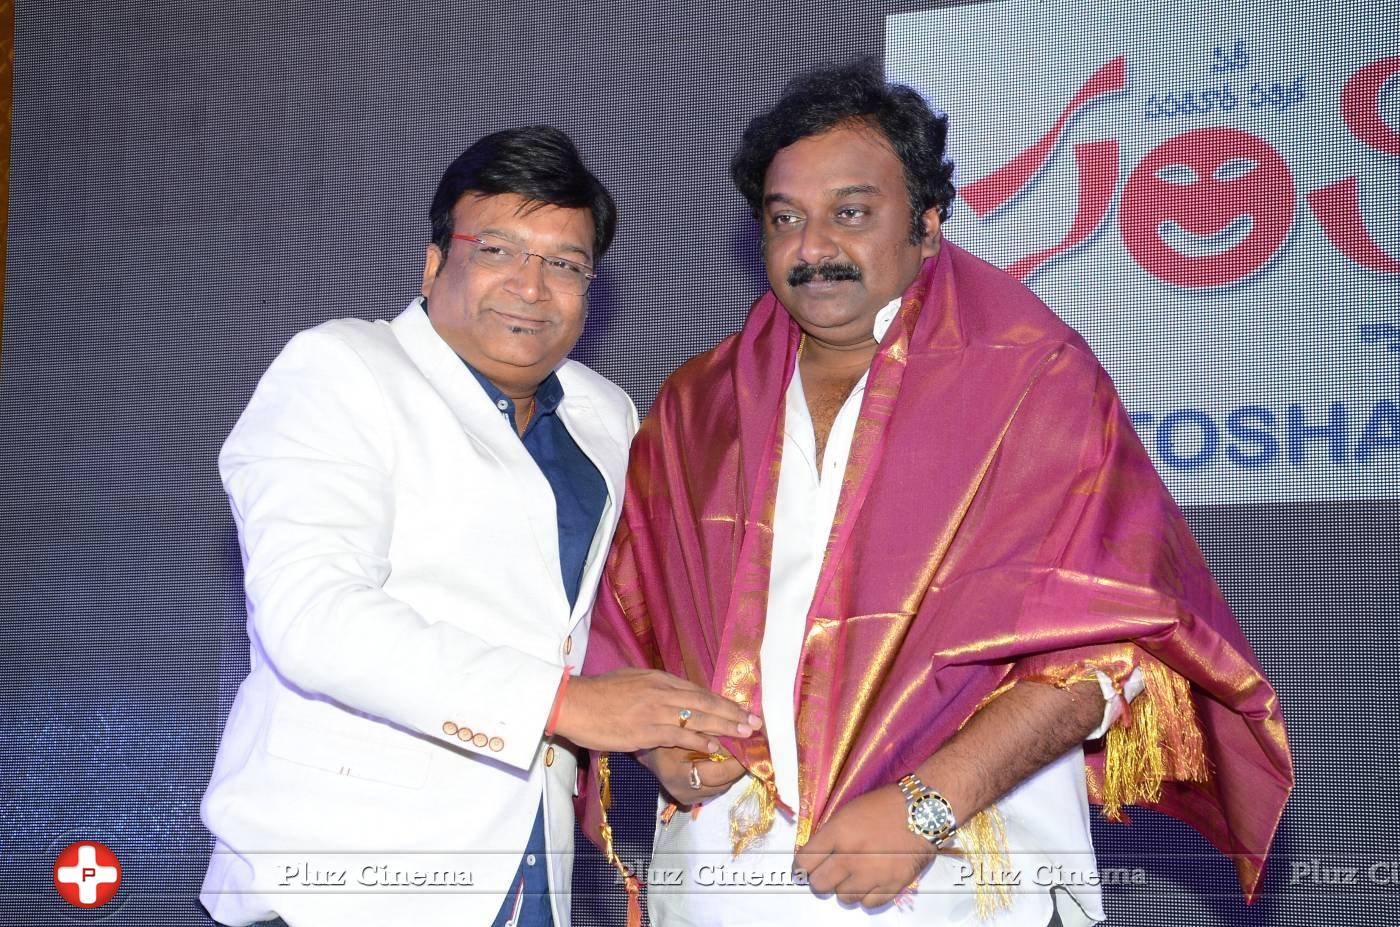 Abhinetri First Look Launch Stills | Picture 1328347